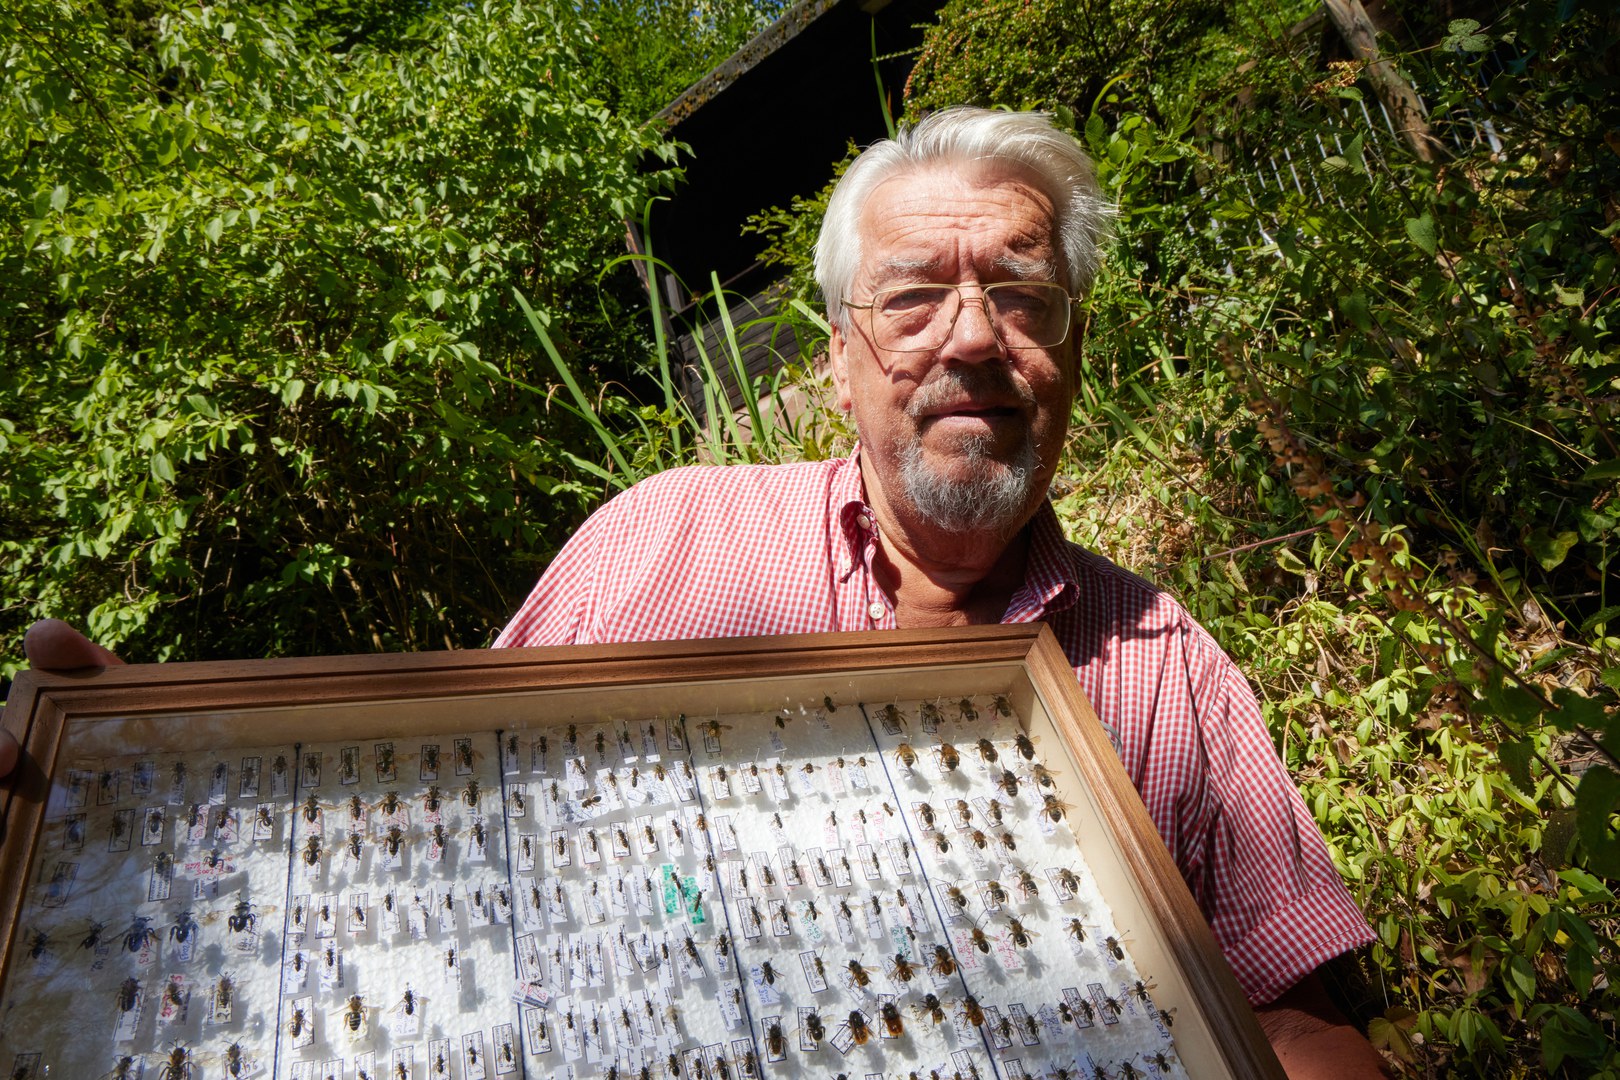 In his garden, the zoologist has identified 83 different species of wild bee alone.